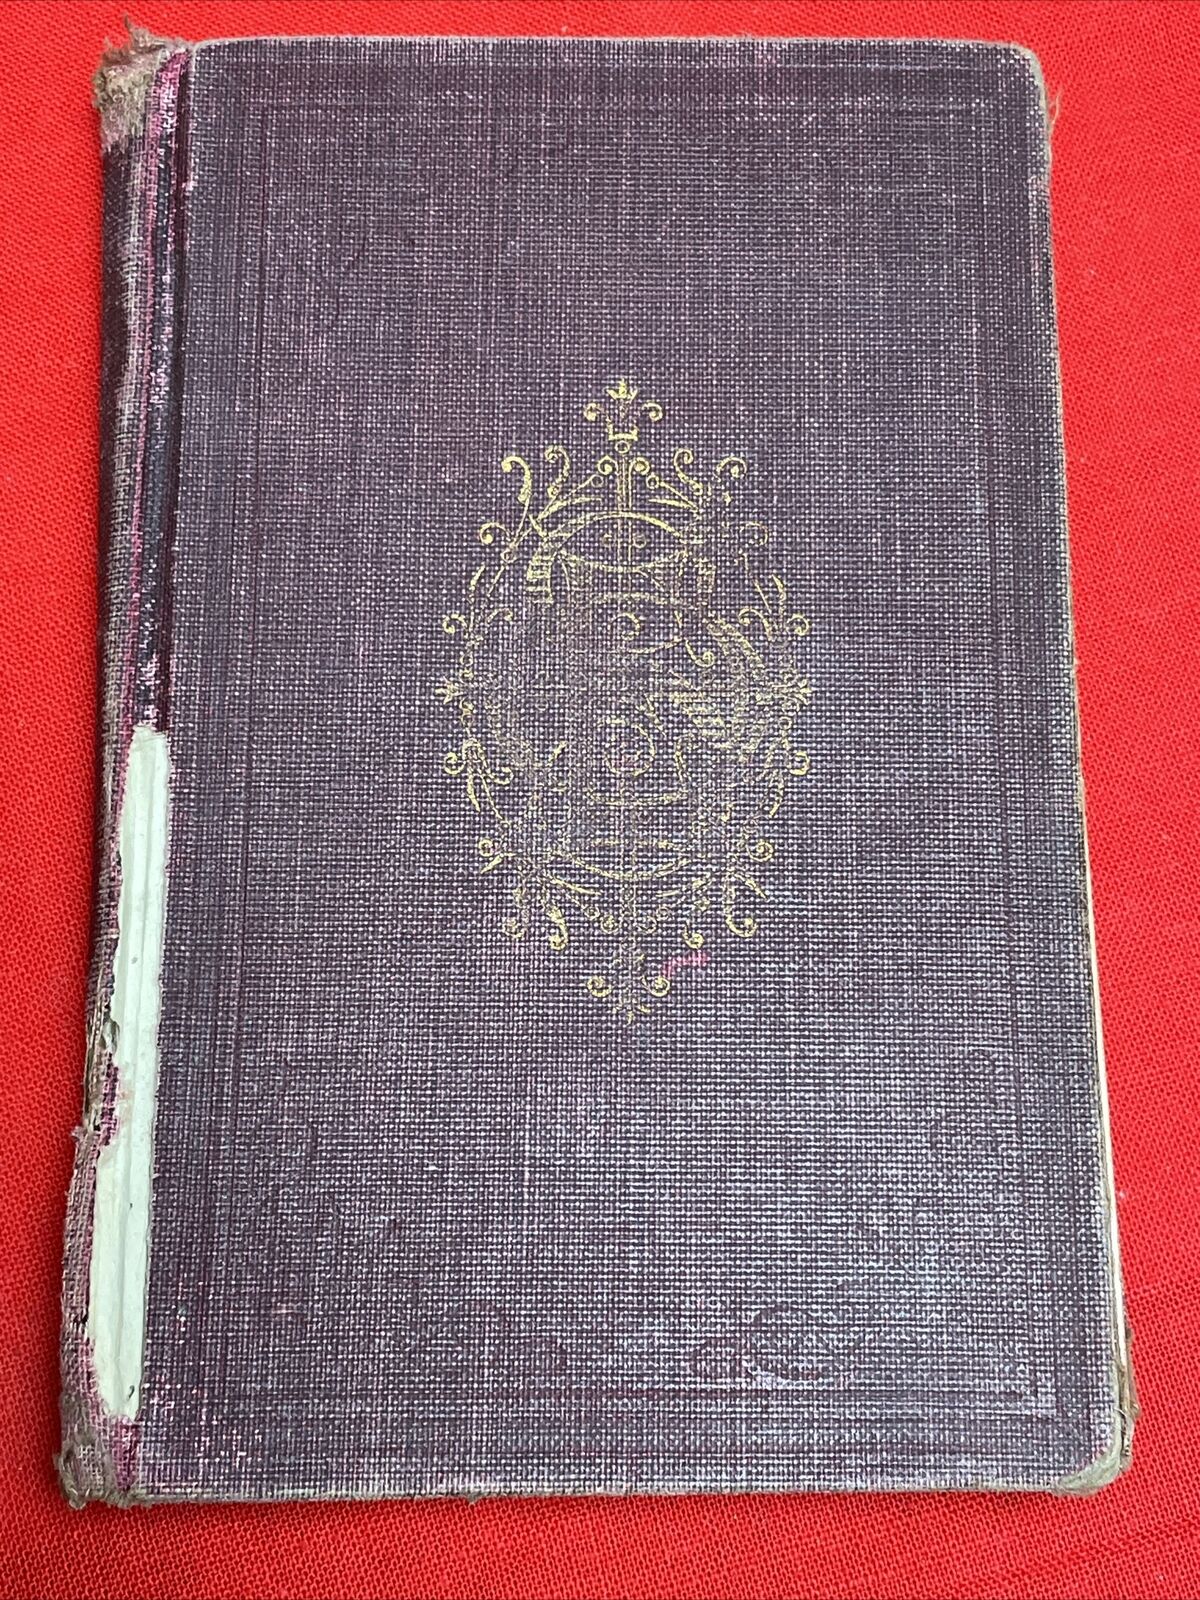 Antique 1906 Ninth Edition Ritual Of The Order Of Eastern Star Free Mason Book.